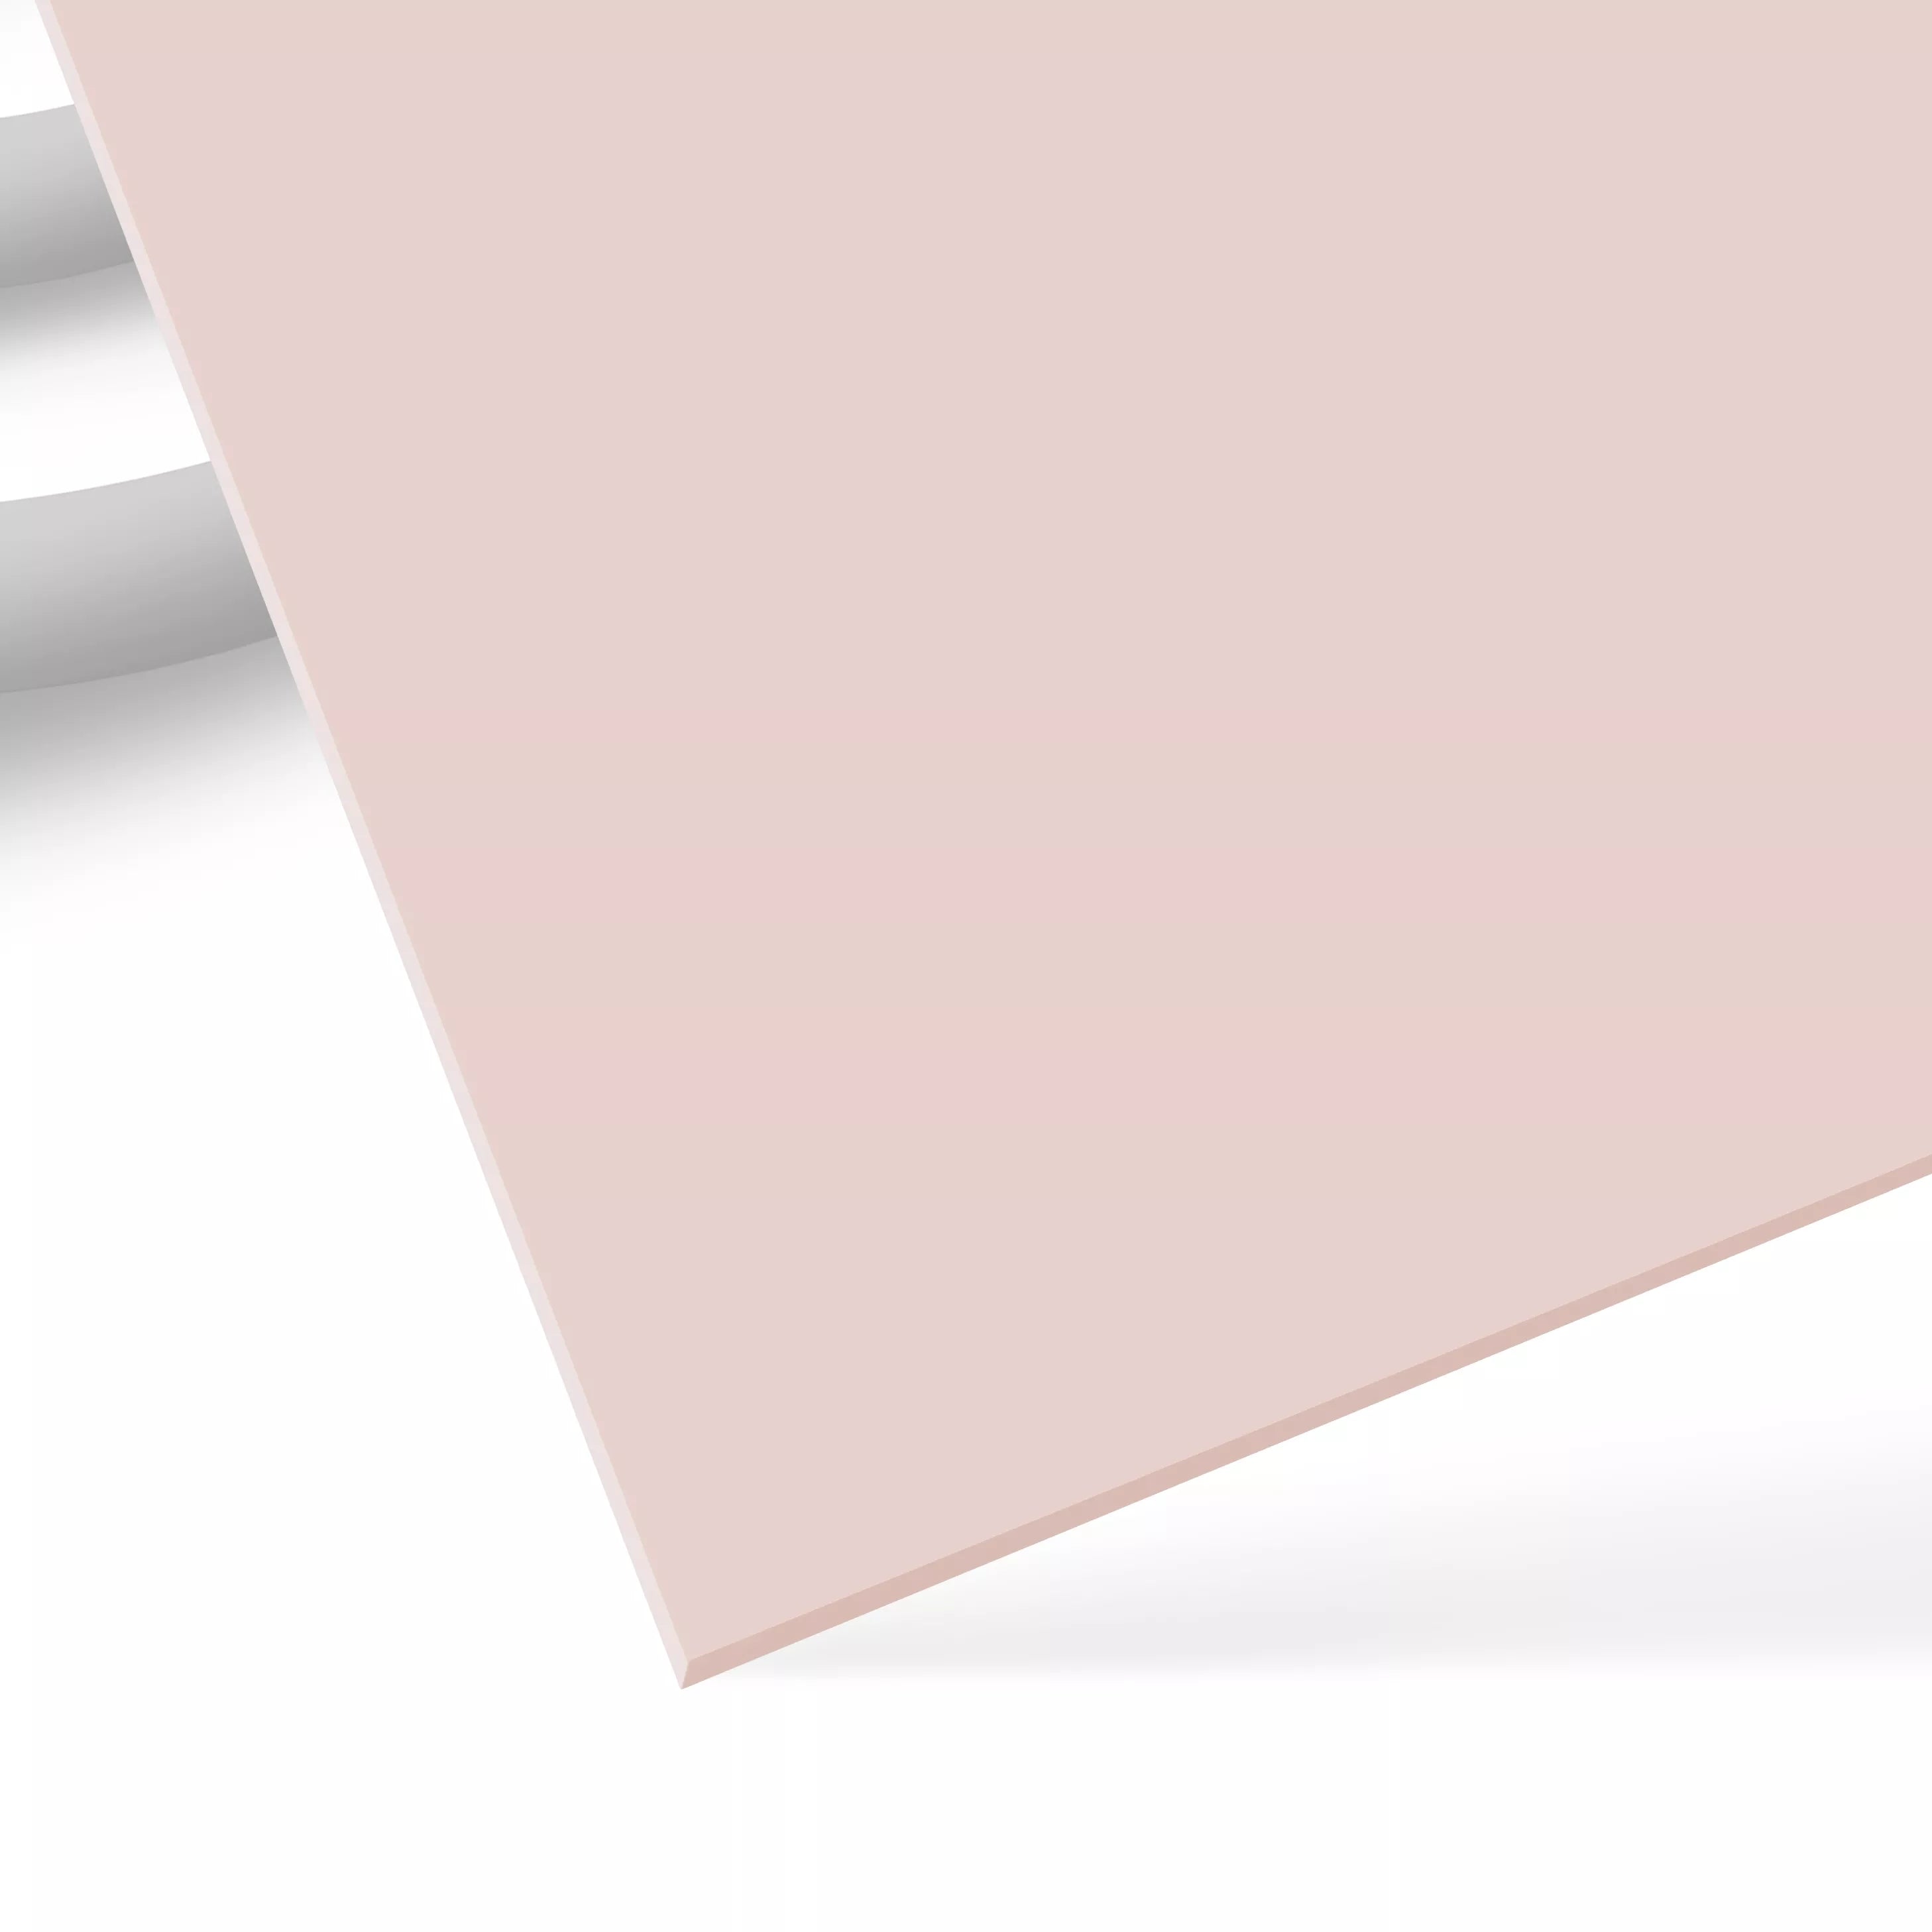 Acrylic Sheets - Cut to Size - Opaque Light Blush Pink - S6067